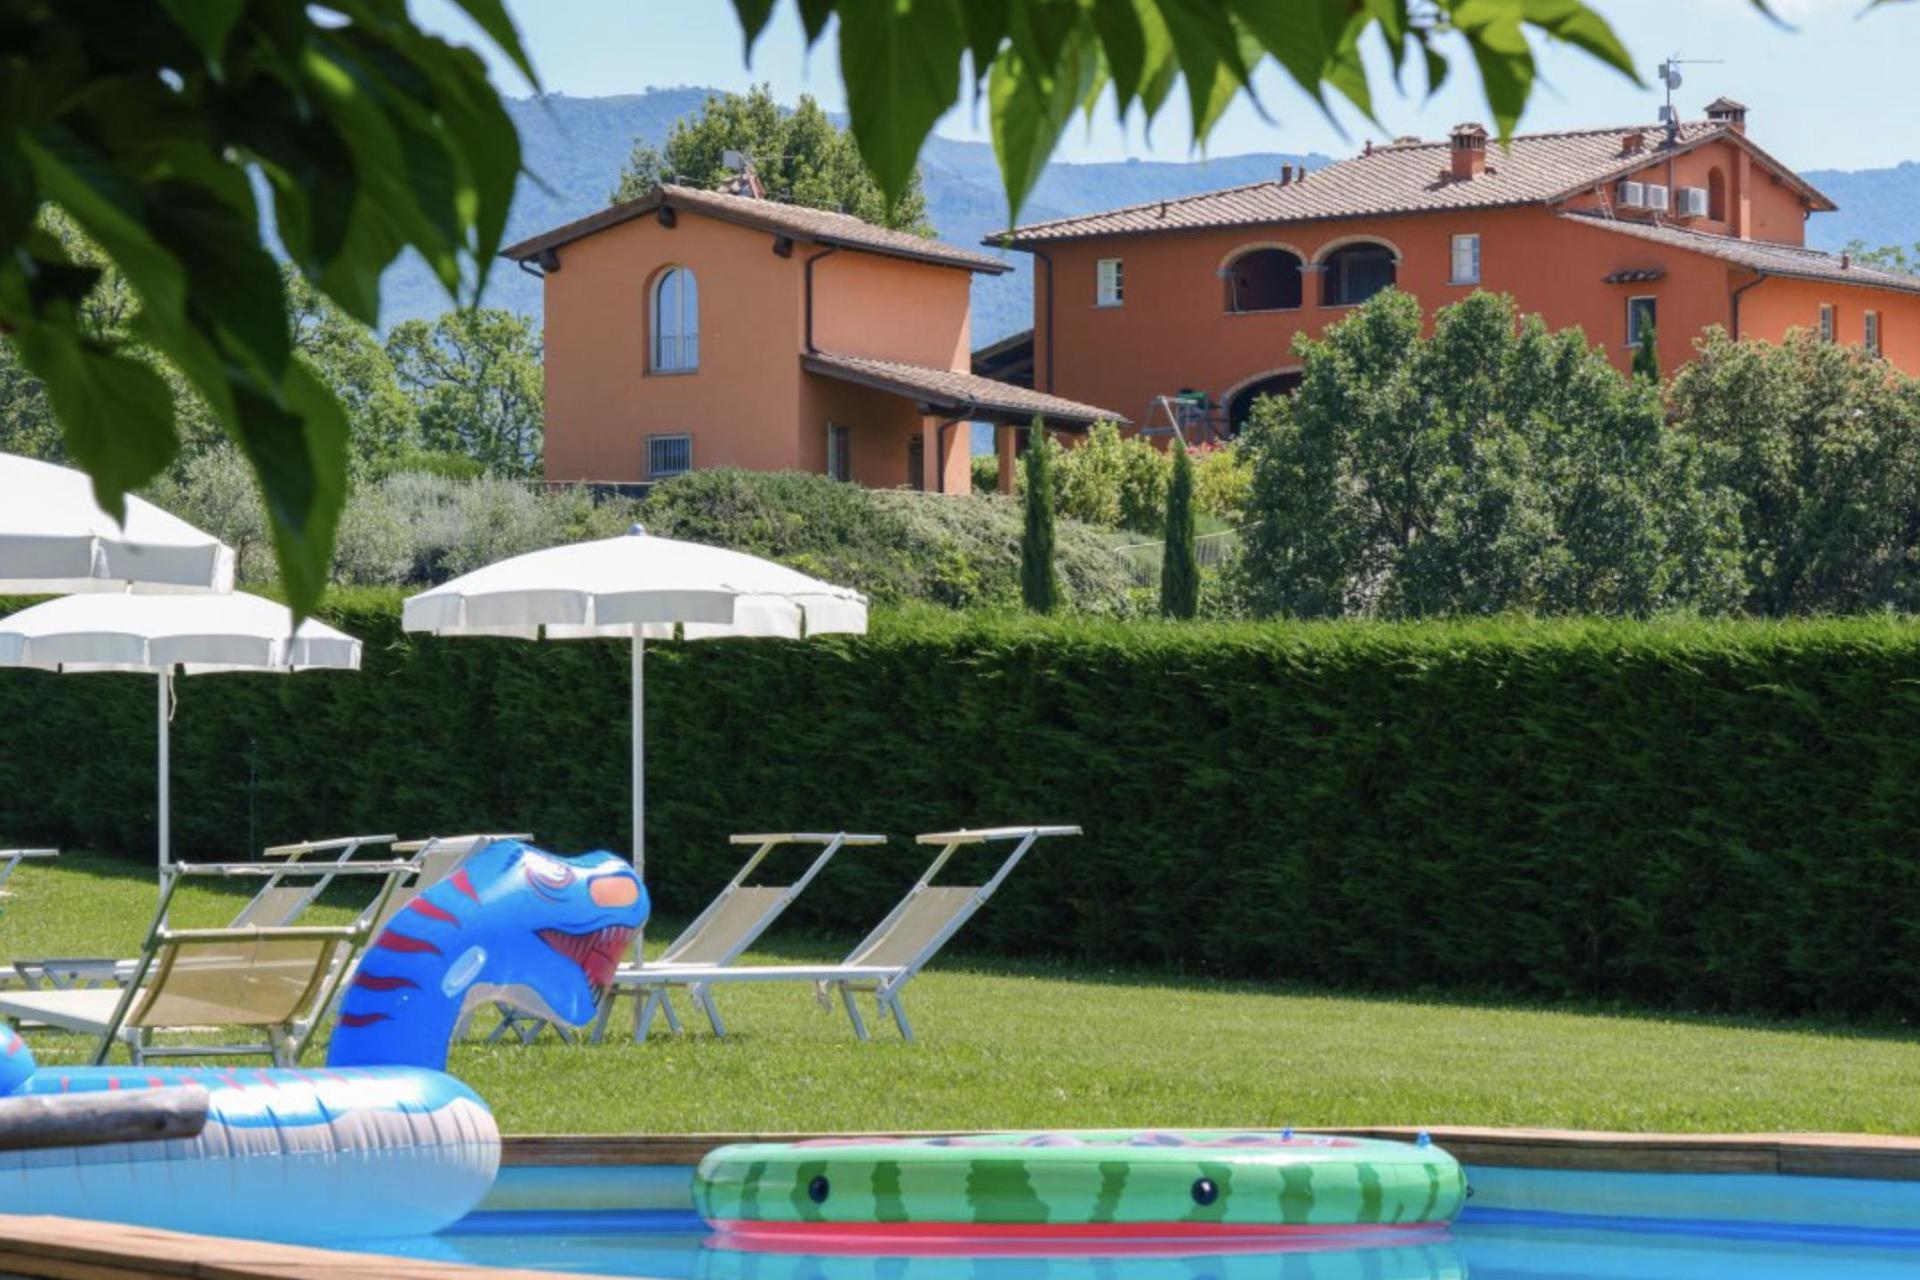 Agriturismo in Tuscany with design interiors